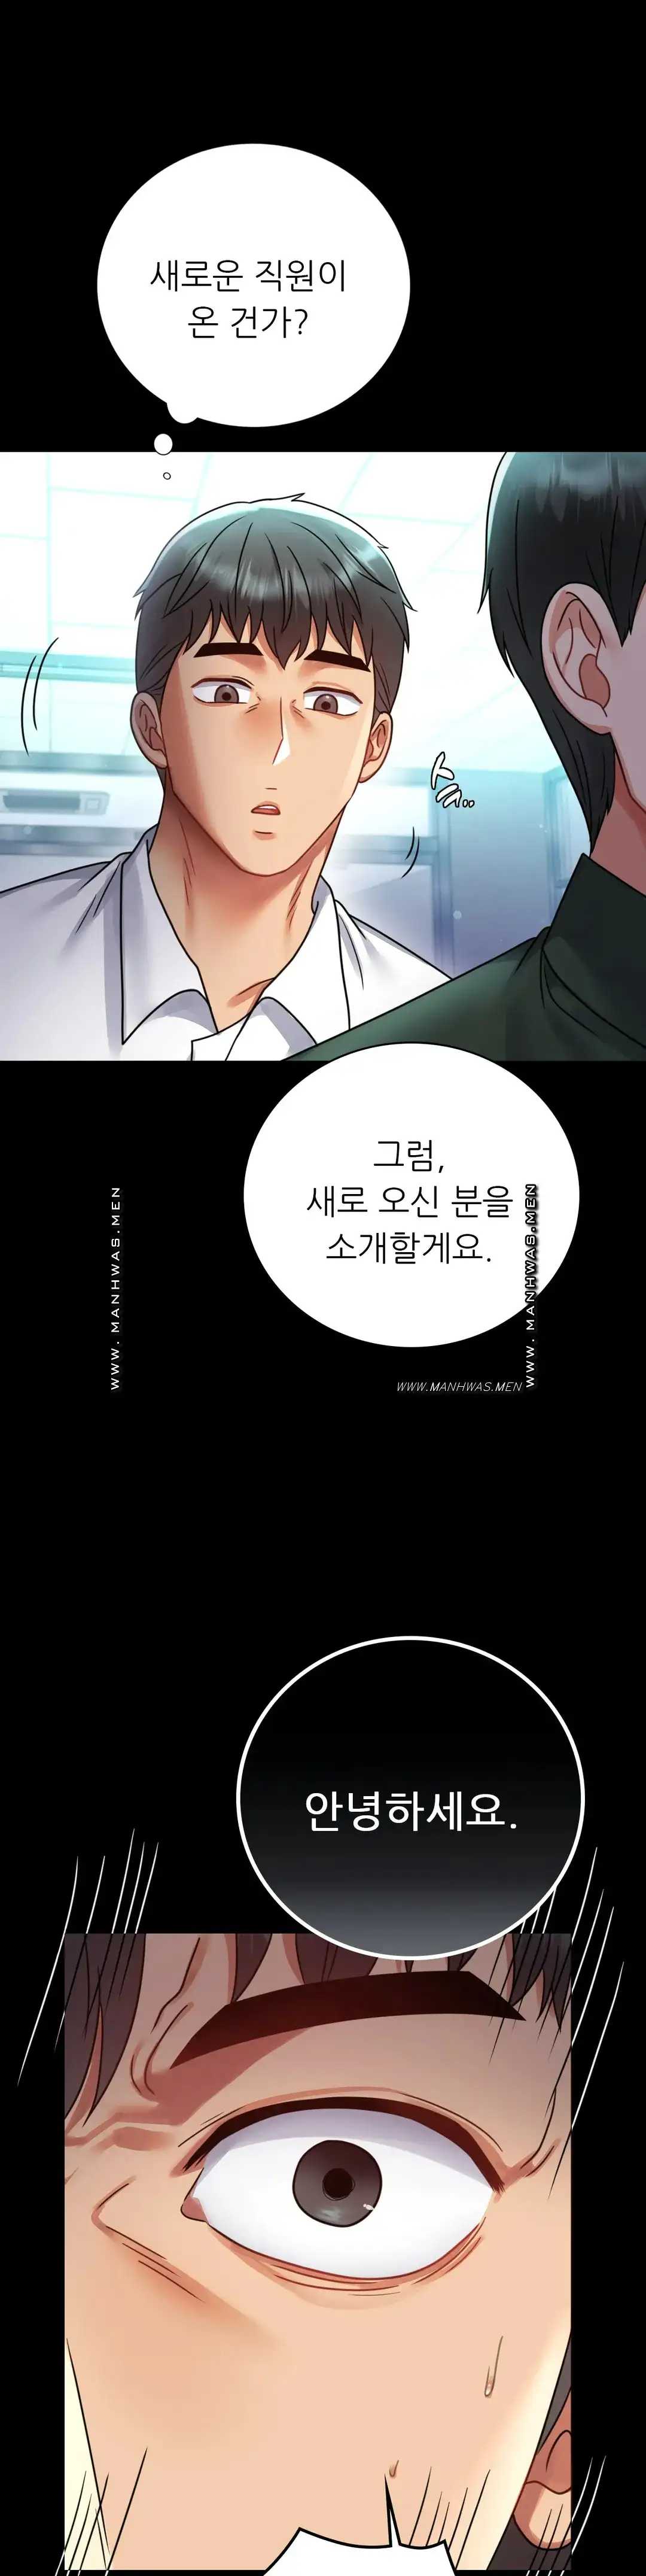 illicitlove Raw - Chapter 61 Page 1